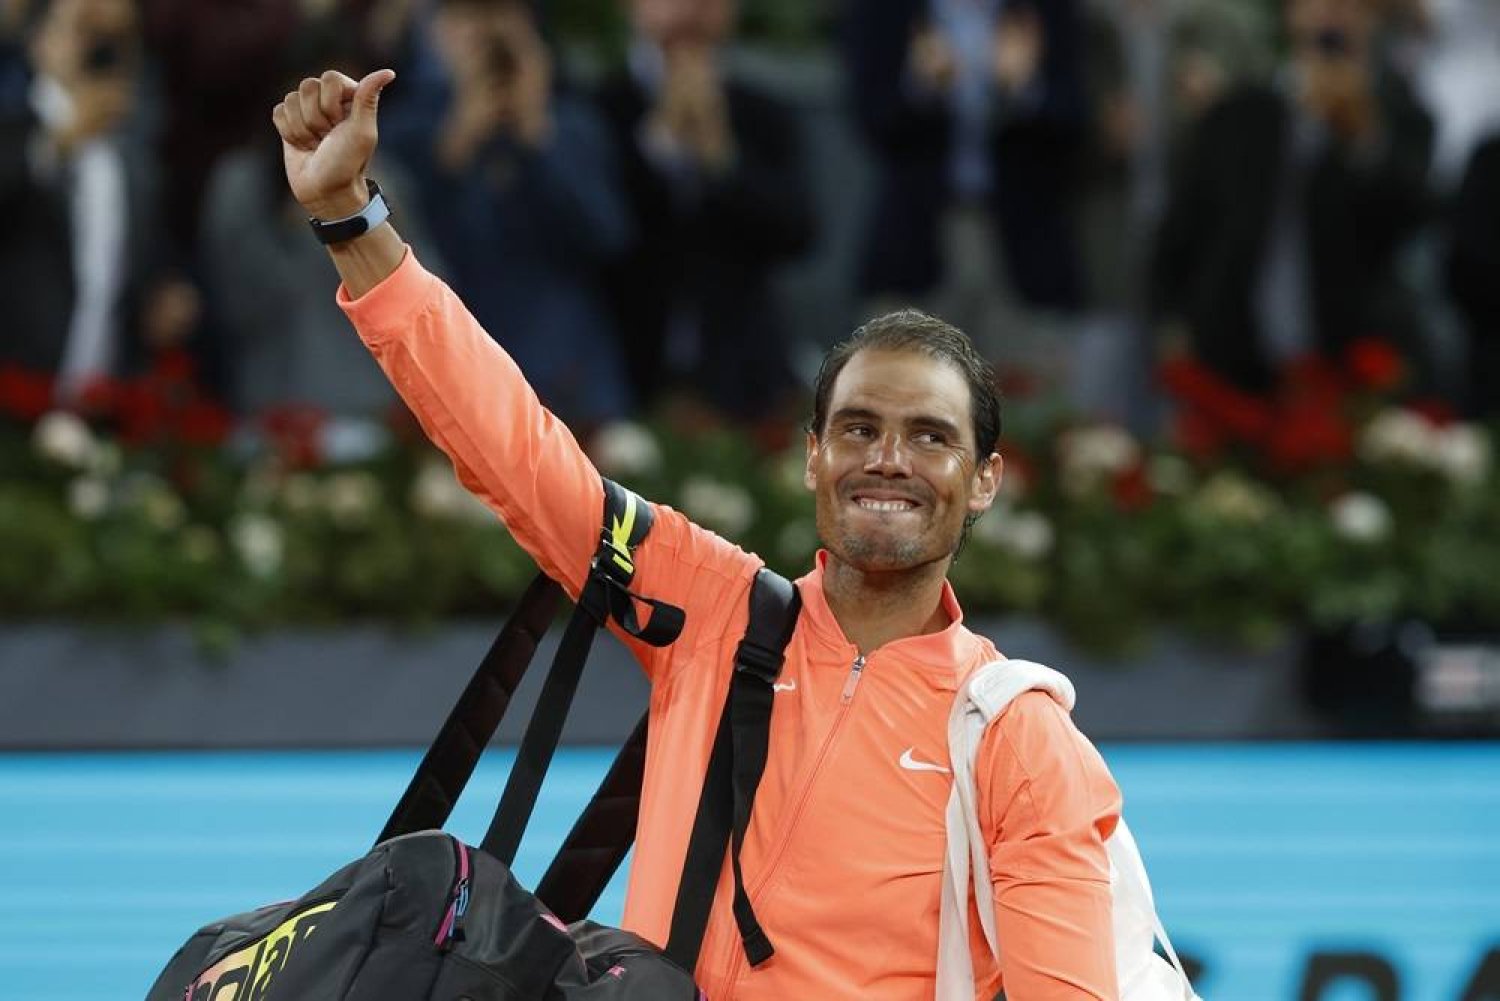 Spanish tennis player Rafa Nadal reacts after his round of 16 match against Jiri Lehecka of Czech Republic at the Madrid Open tennis tournament in Madrid, Spain, 30 April 2024. (EPA)